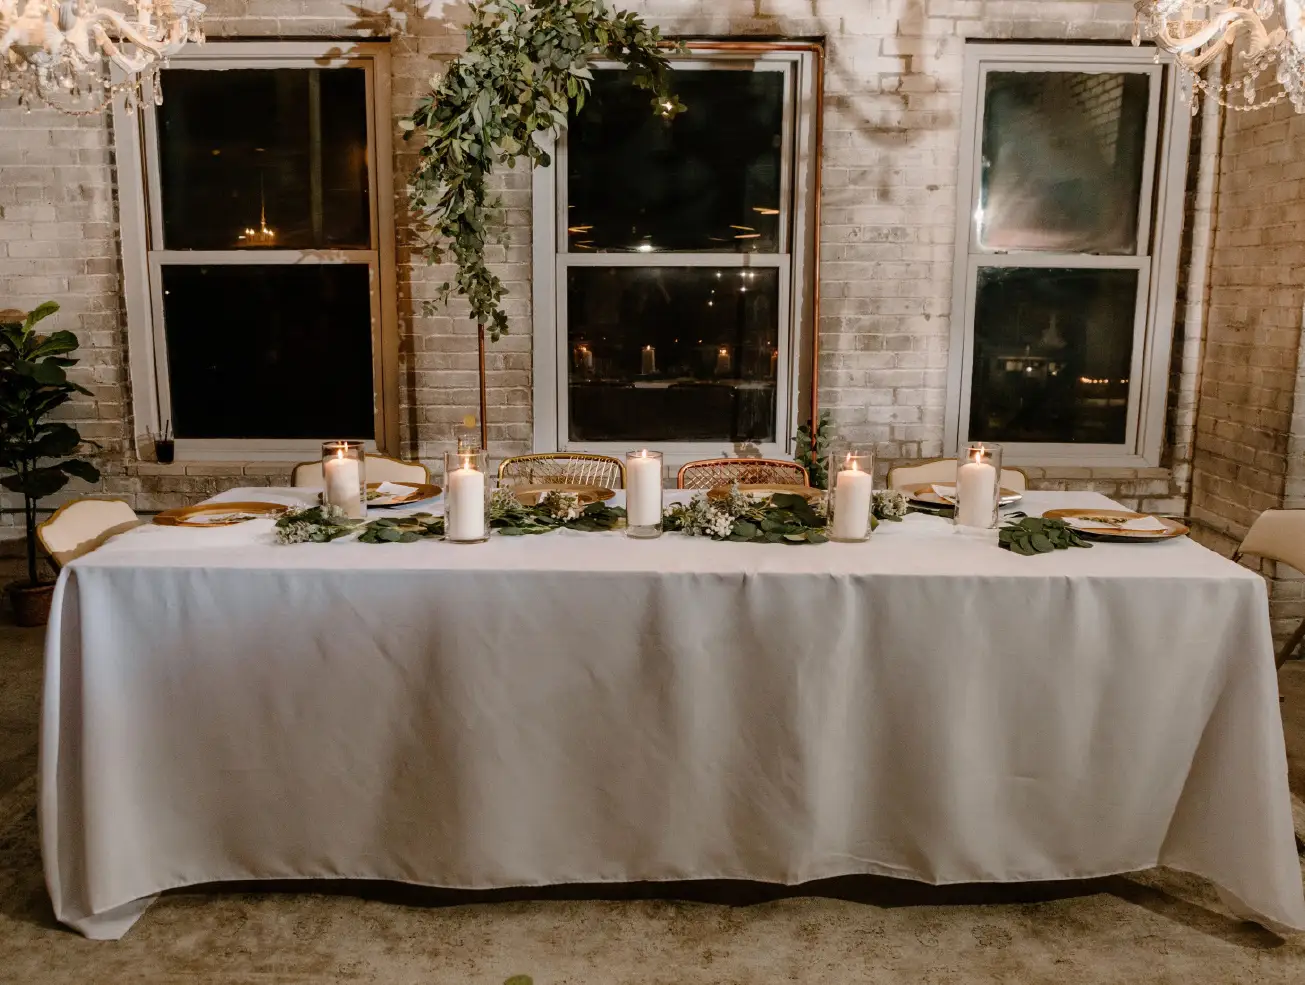 bride and groom's dining table